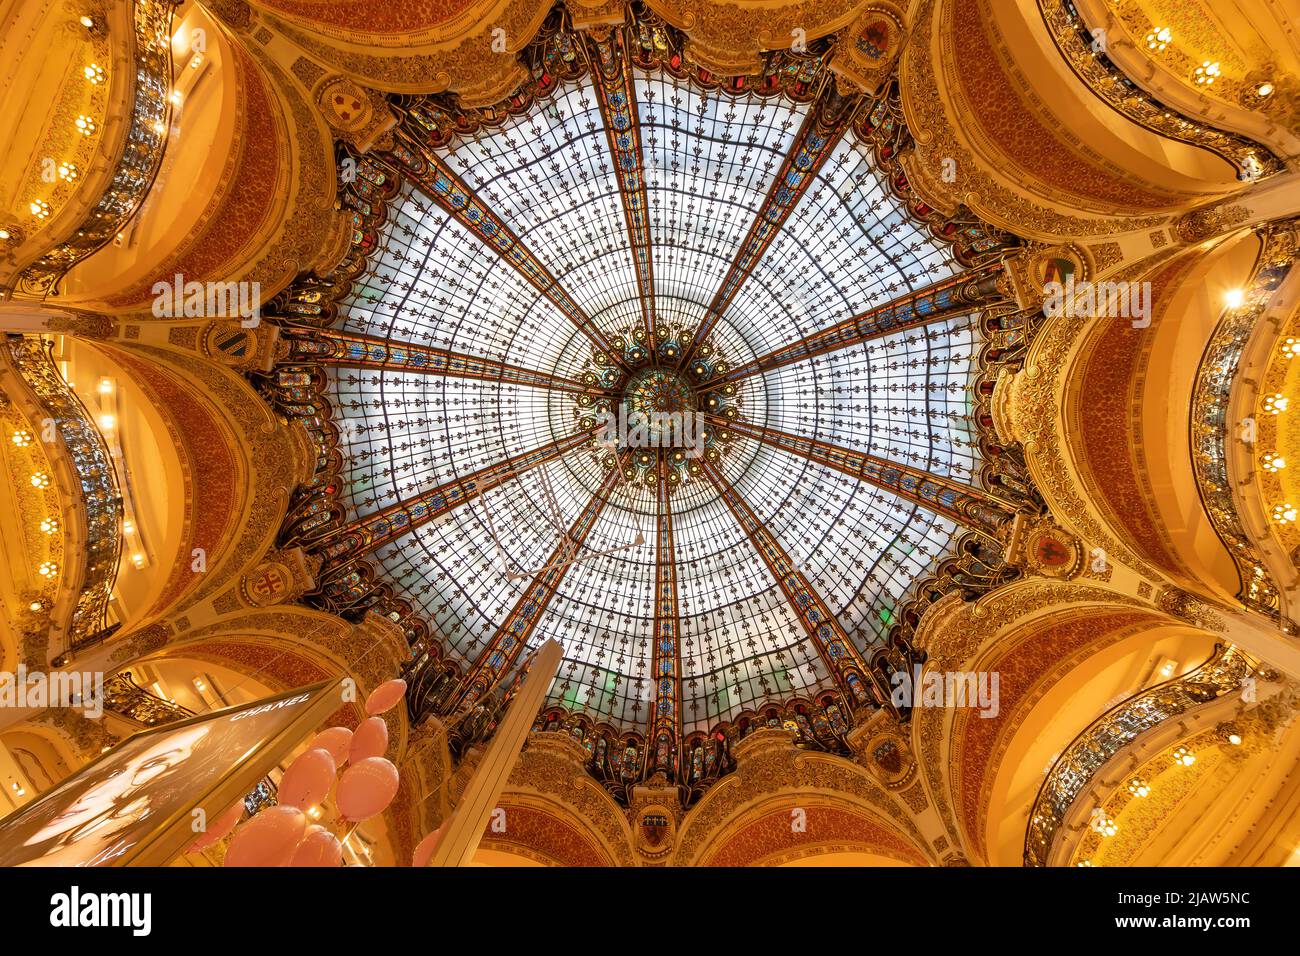 Paris, France - March 17, 2018: Ceiling of The Galeries Lafayette, an upmarket French department store chain, the biggest in Europe. Stock Photo